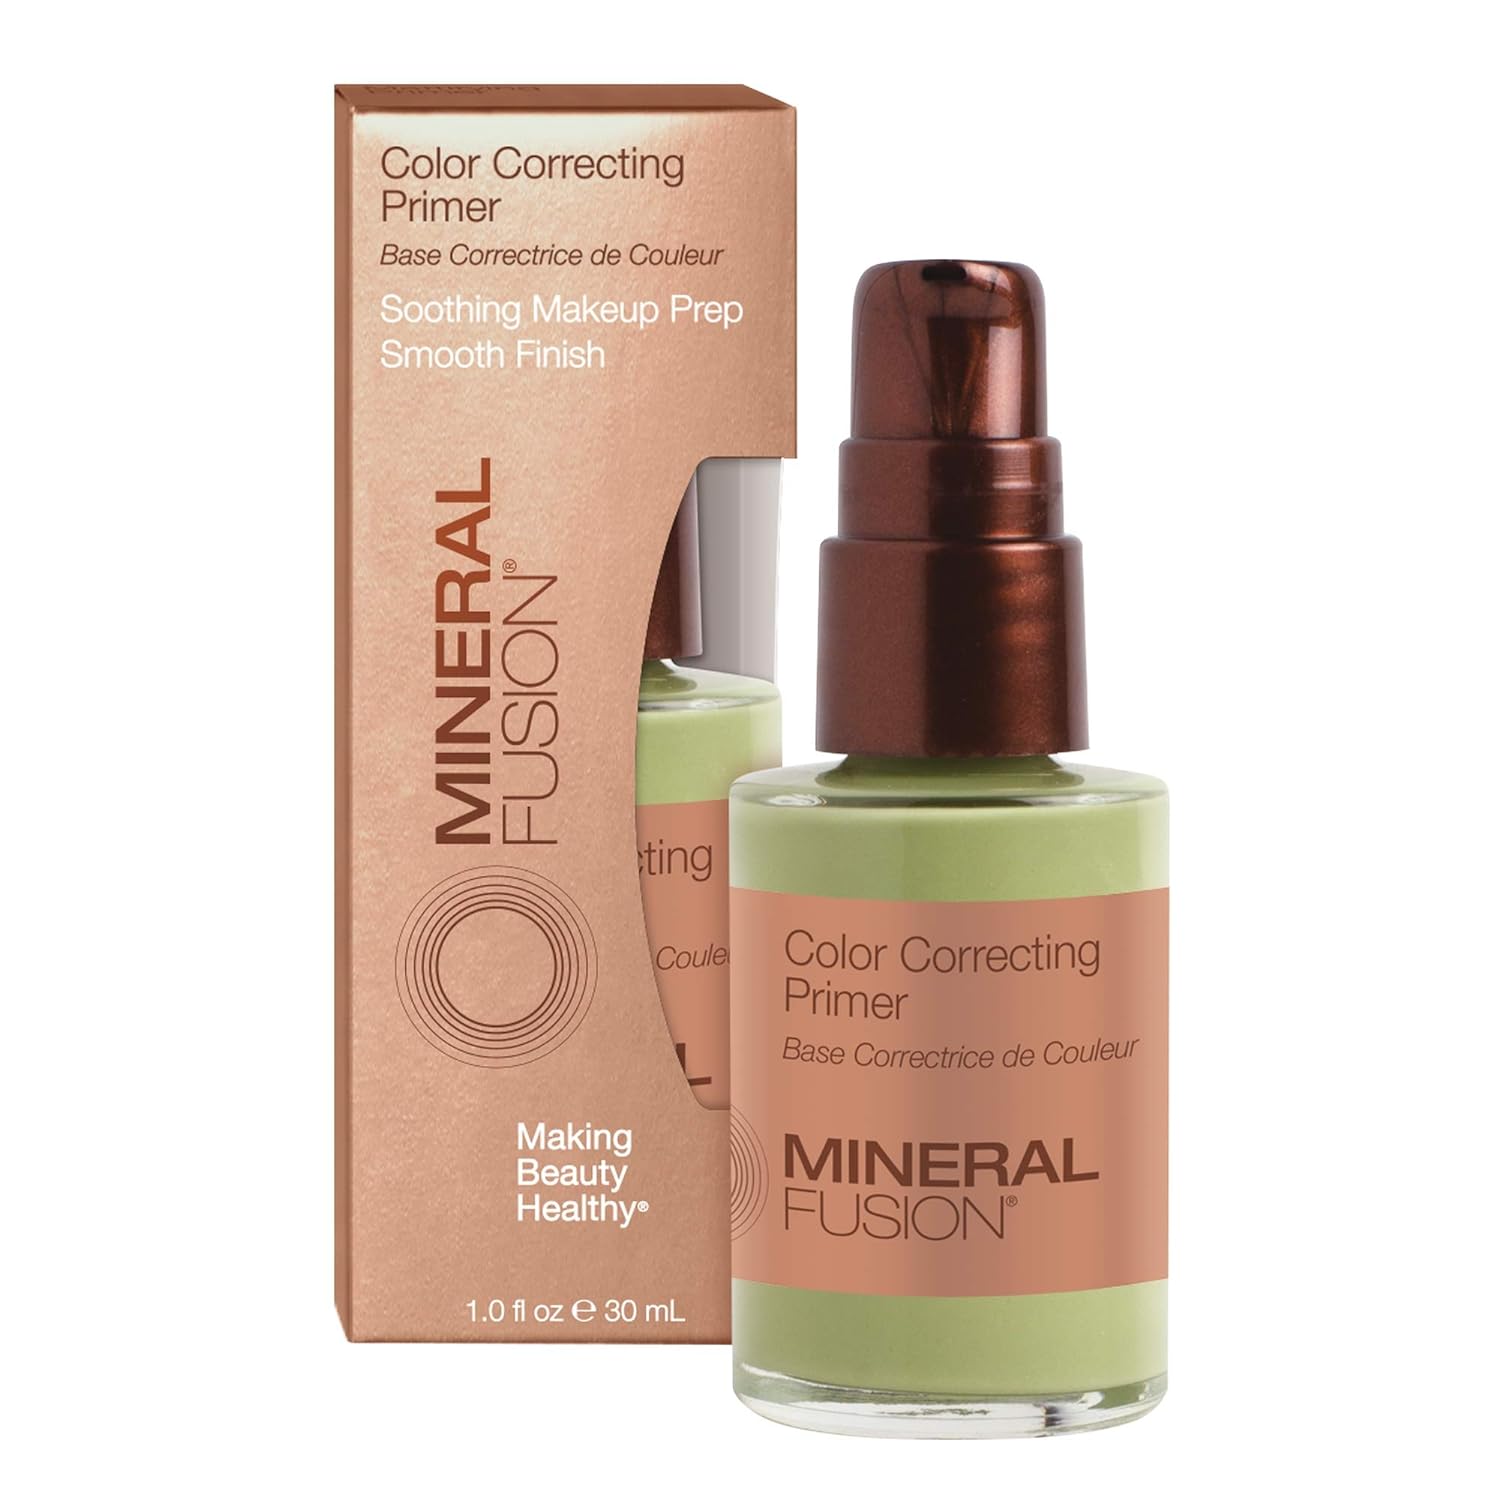  Mineral Fusion Color Correcting Primer By Mineral Fusion for Women, 1 Ounce (Packaging May Vary)